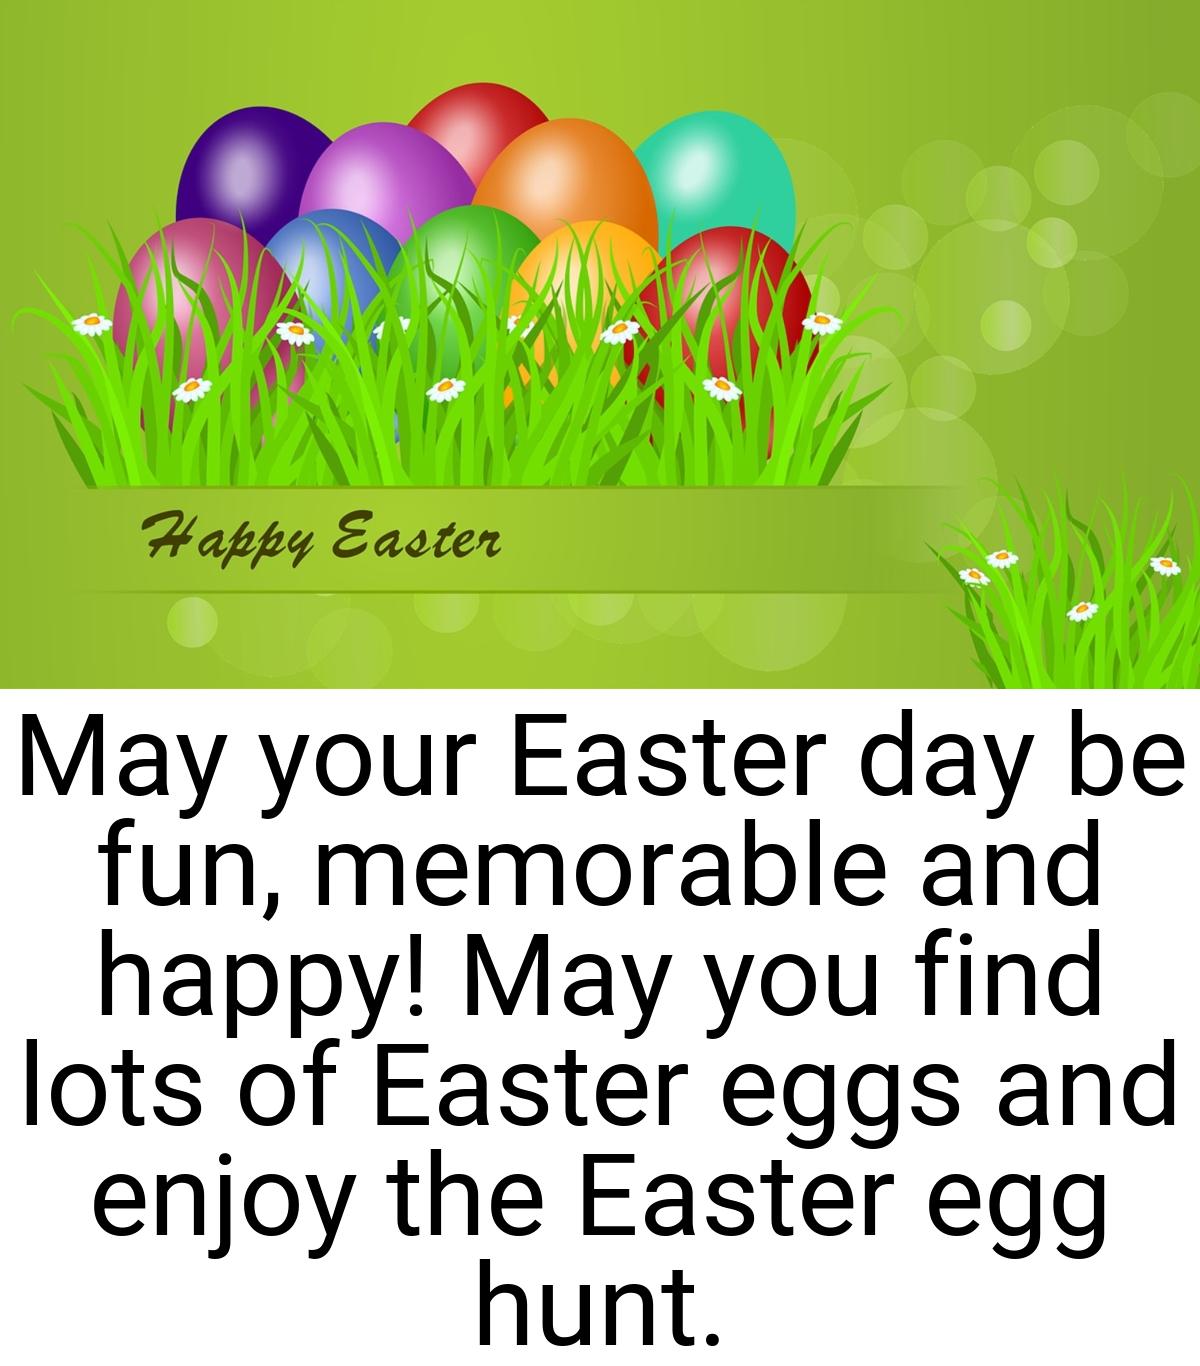 May your Easter day be fun, memorable and happy! May you